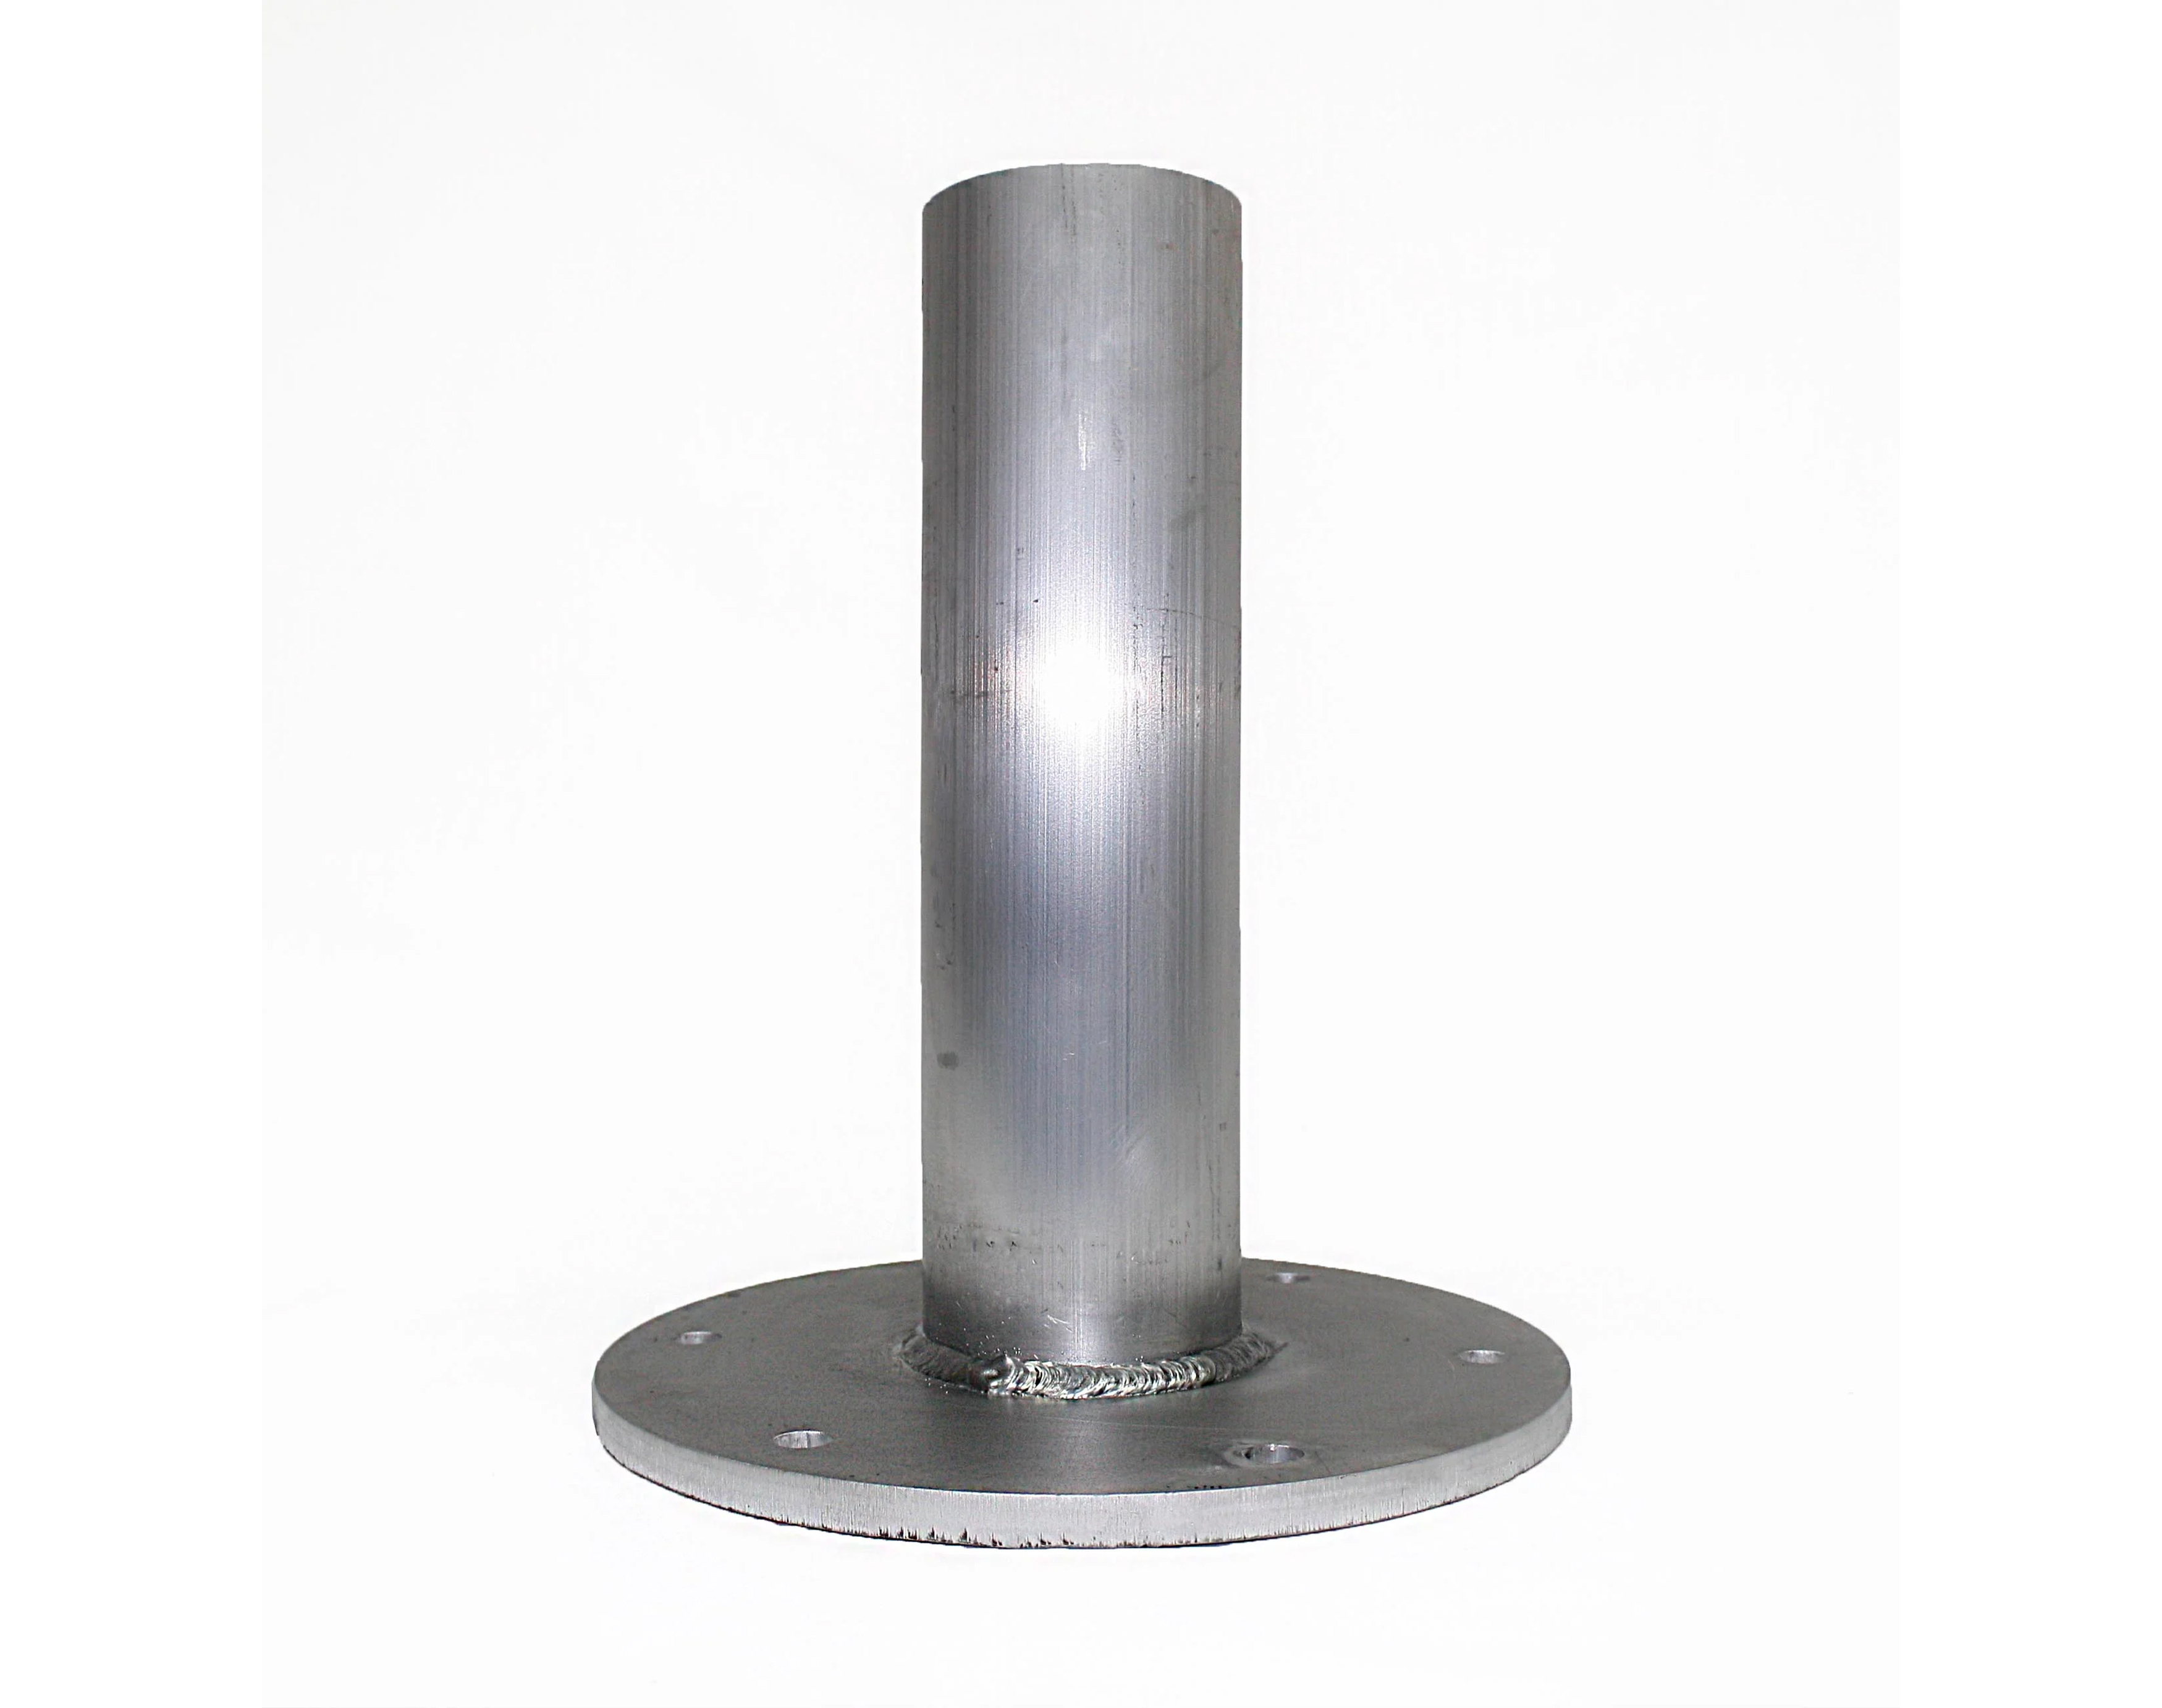 Aluminum - Column section—½ in. flange with 4 in. O.D. x ¼ in. wall round tubing